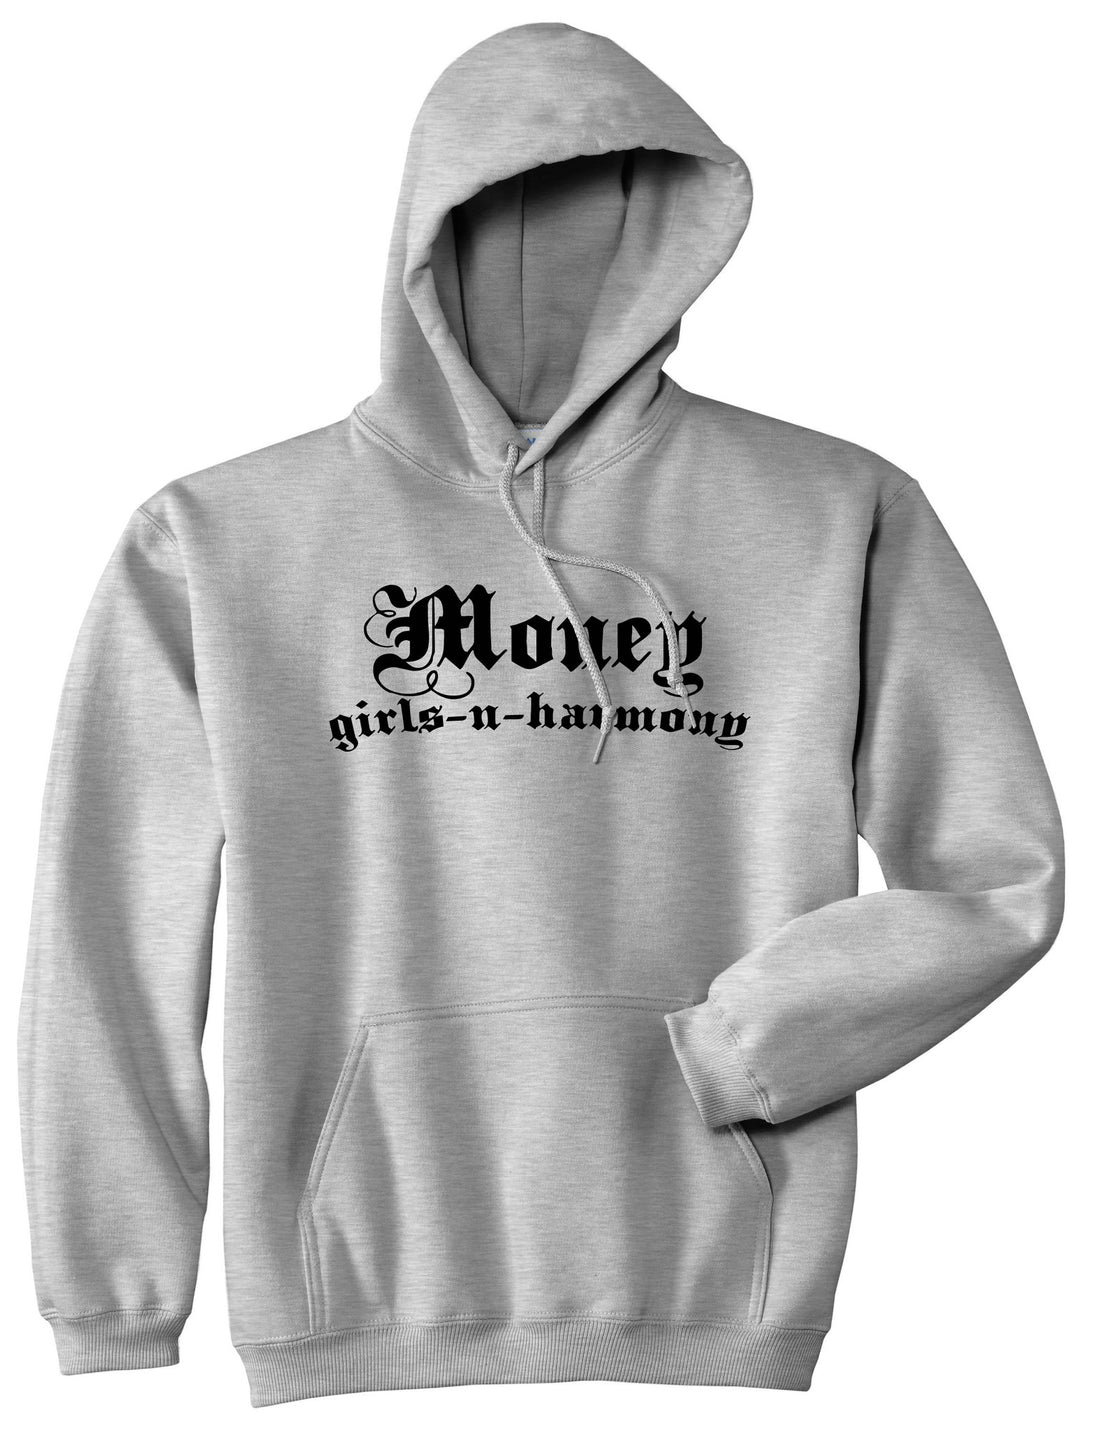 Money Girls And Harmony Pullover Hoodie in Grey By Kings Of NY